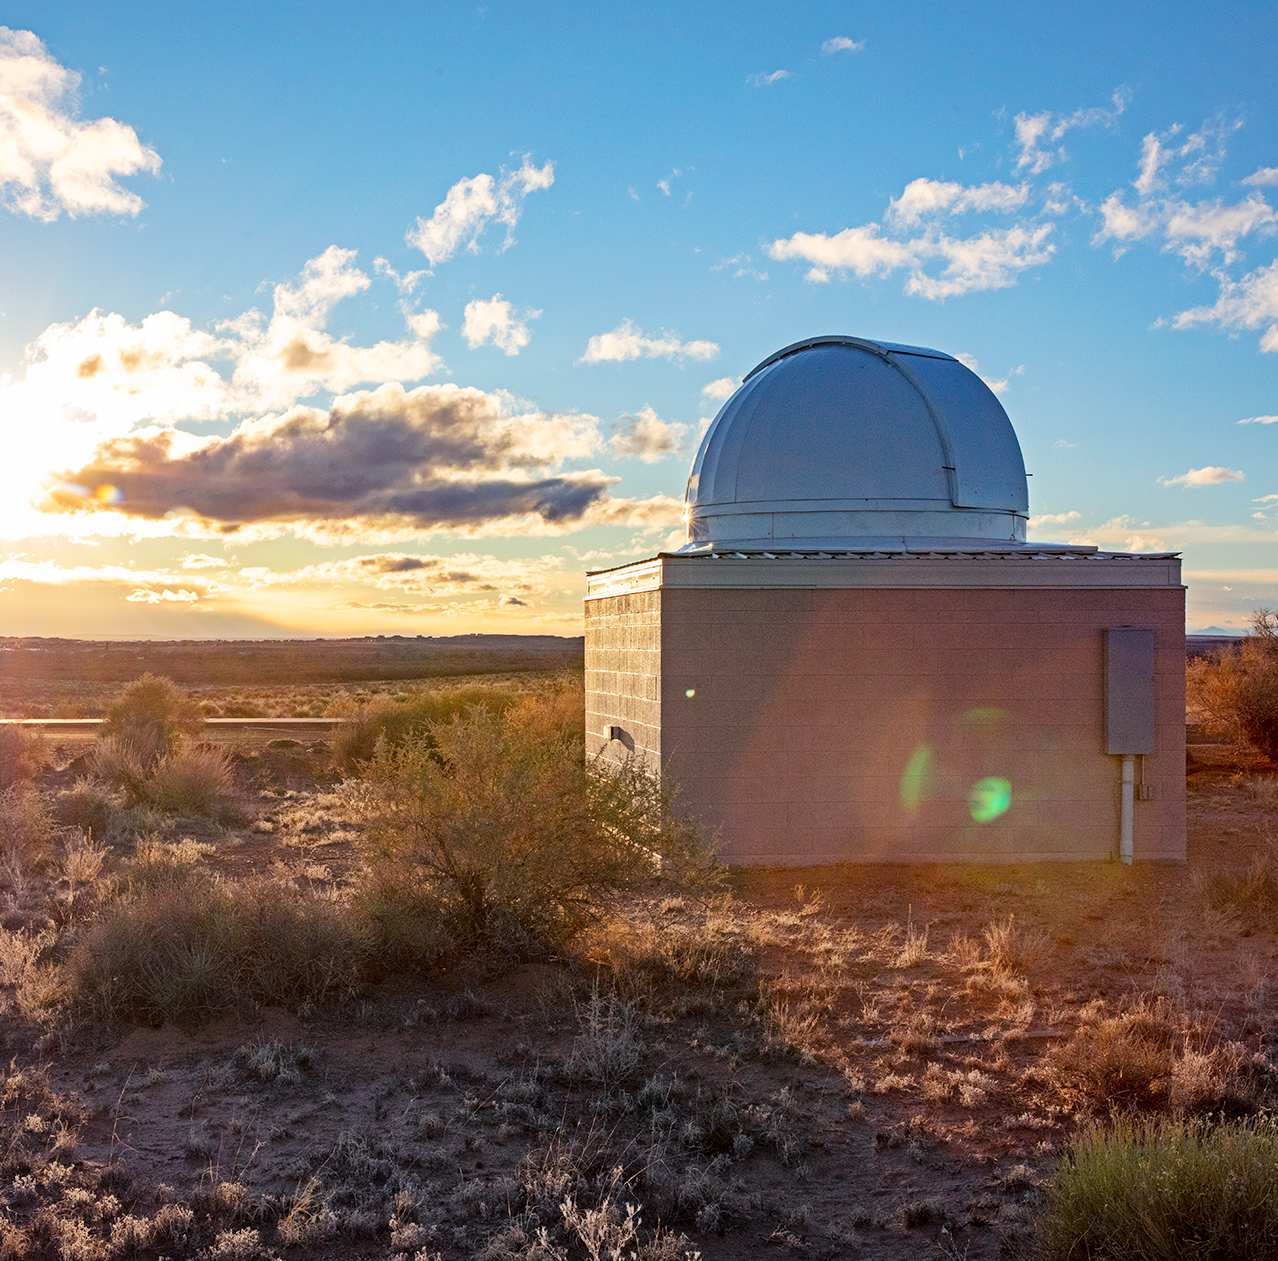 An observatory with a white domed roof sitting in a grassy landscape with the sun setting on the horizon.